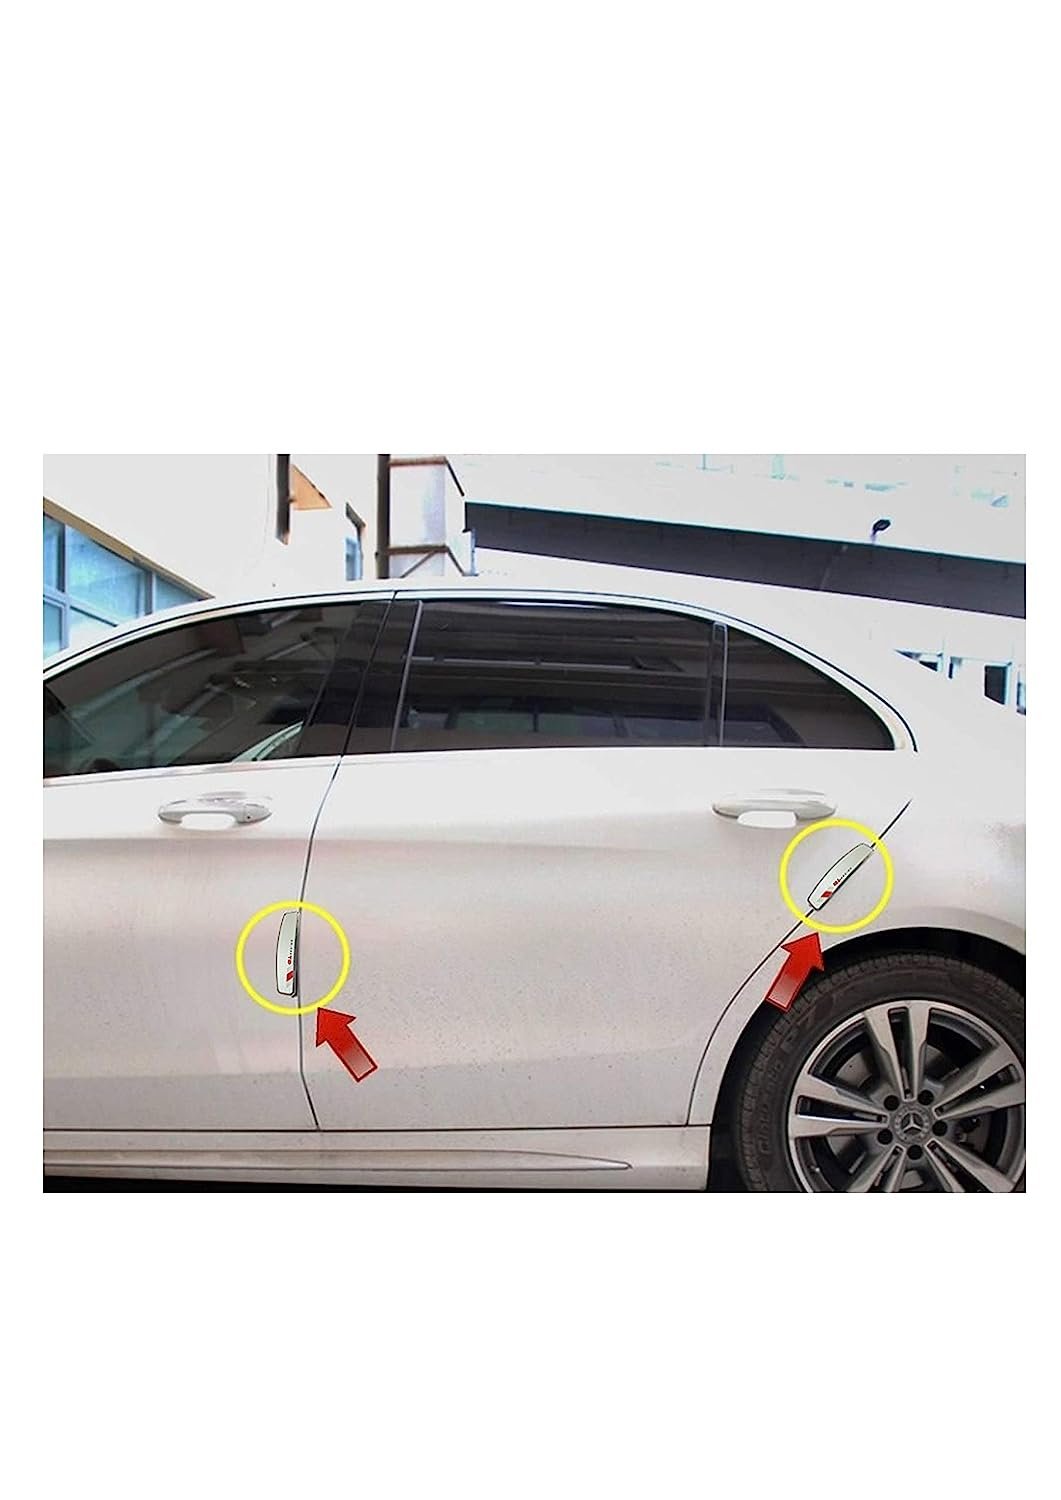 GT Silver And Red Chrome Door Guard Protection For Cars Image 